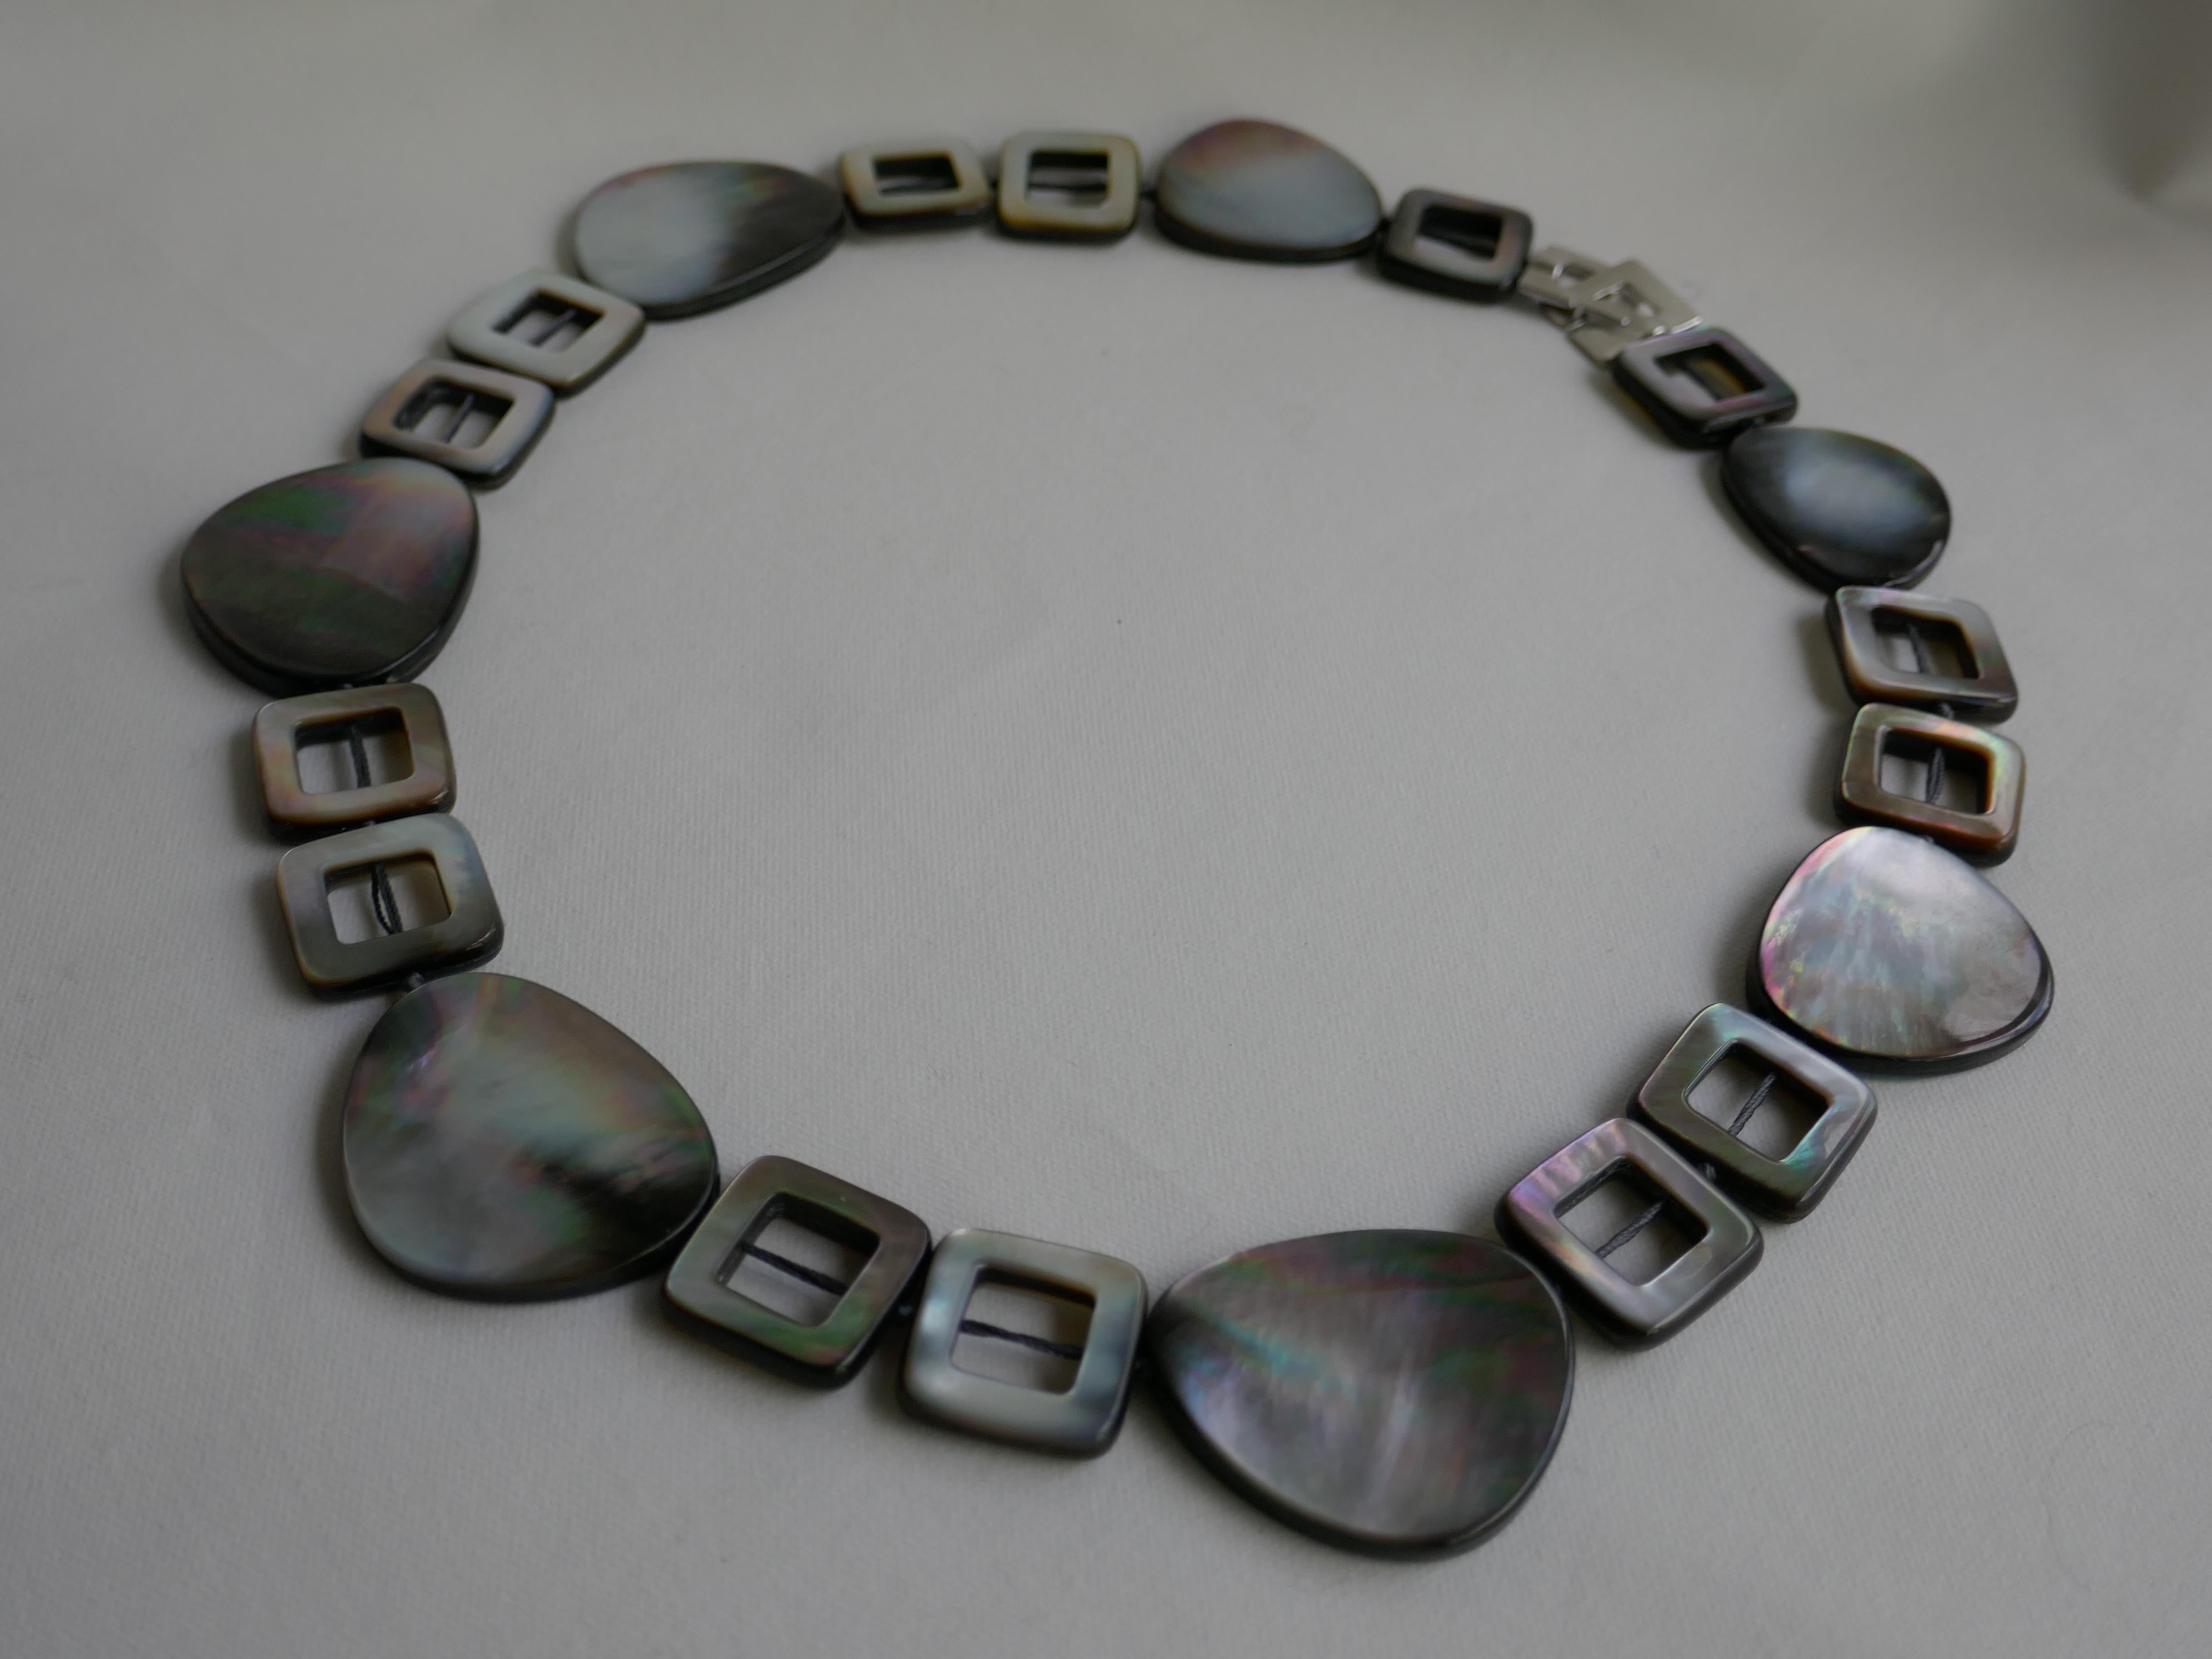 Black lip mother of pearl is beautiful. It Is very luminous and the pieces pick  up on the colors you are wearing. A very wearable piece year round. From what I have seen, black lip mother of pearl look amaz1ng on most skin tones and goes with most